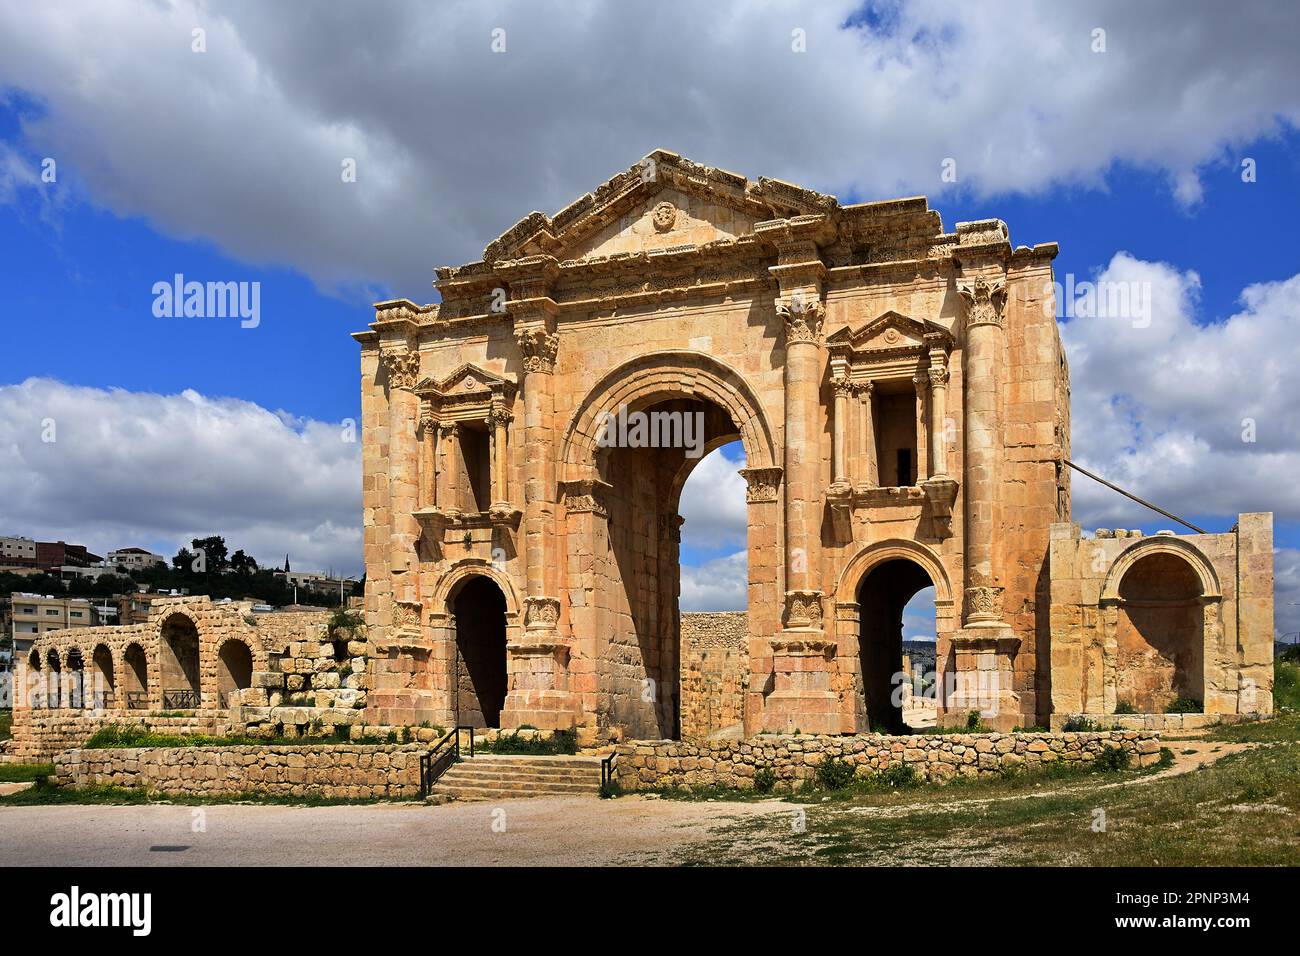 Arch of Hadrian 129/130 AD, Roman ruins, Jerash, Jordan, ancient city, boasts an unbroken chain of human occupation dating back 6500 years, Stock Photo